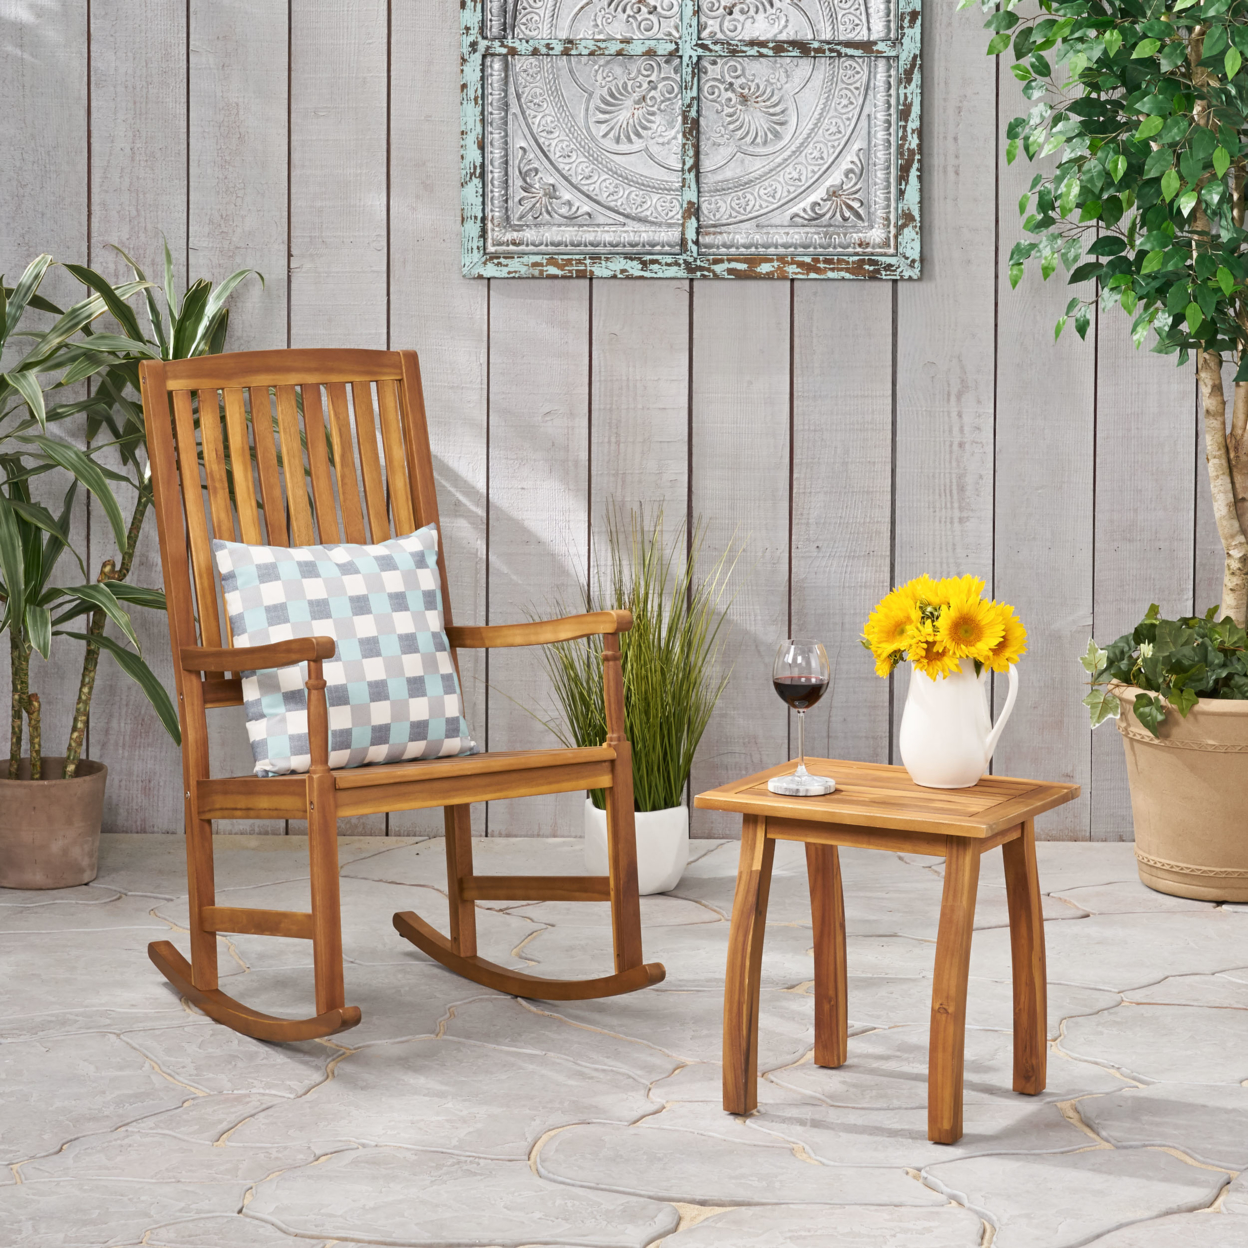 Tobey Outdoor Acacia Wood Rocking Chair And Side Table Set - Gray Finish